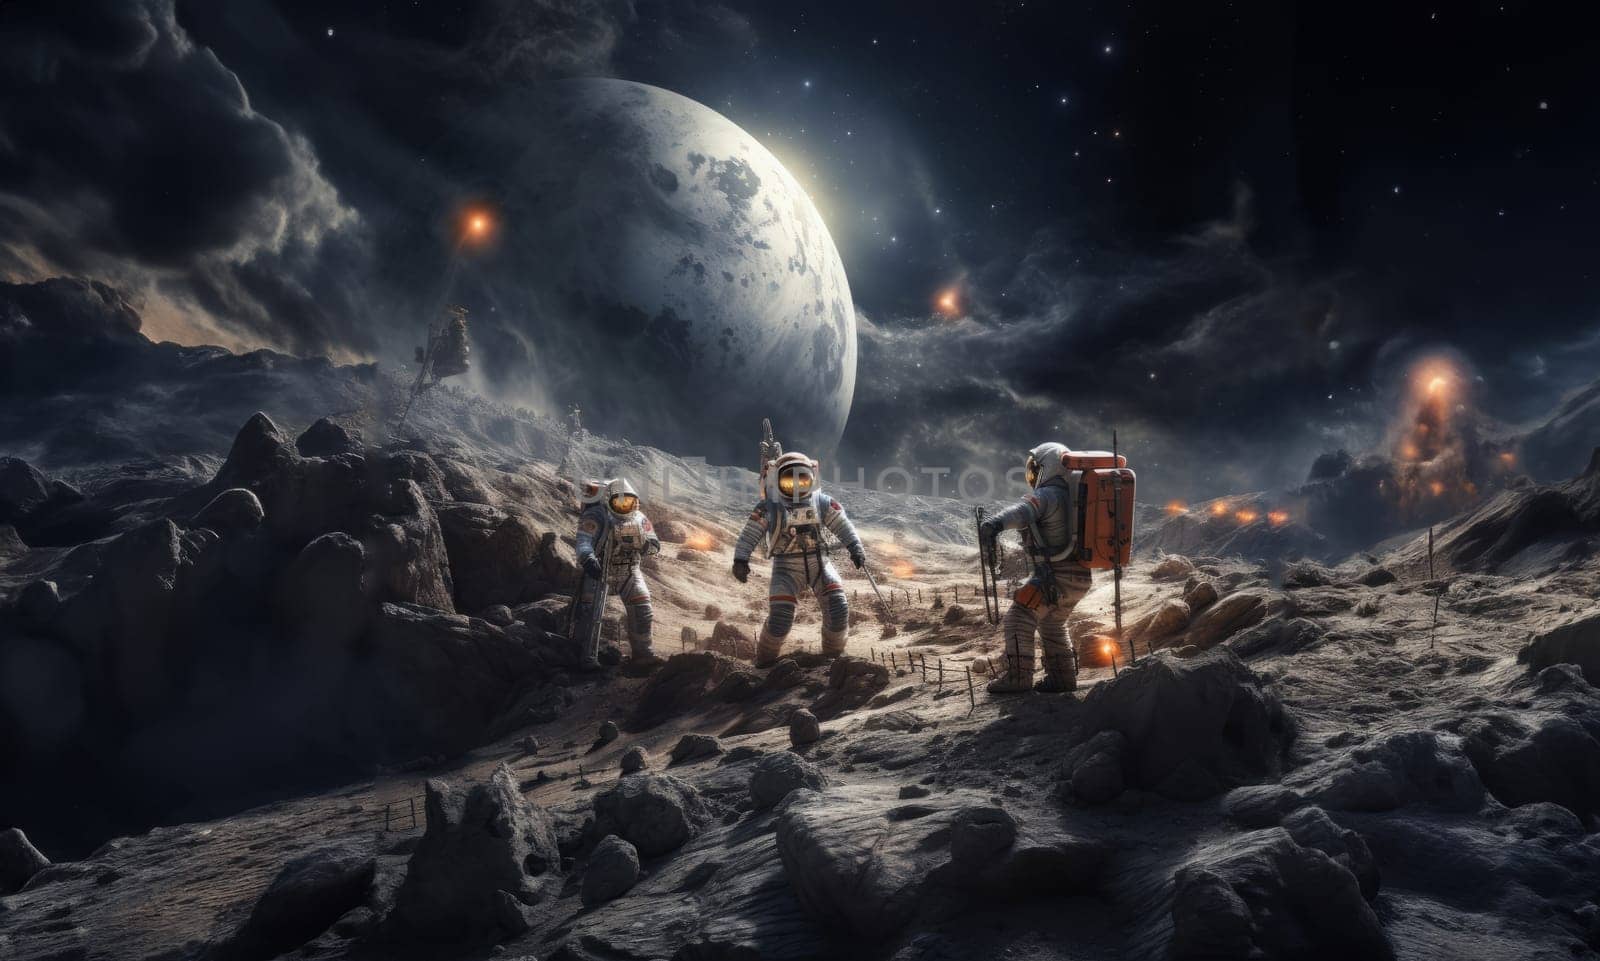 A group of modern astronauts is depicted exploring the hazardous surface of the moon in outer space, showcasing the daring mission of discovery and adventure in lunar exploration.Generated image by dotshock